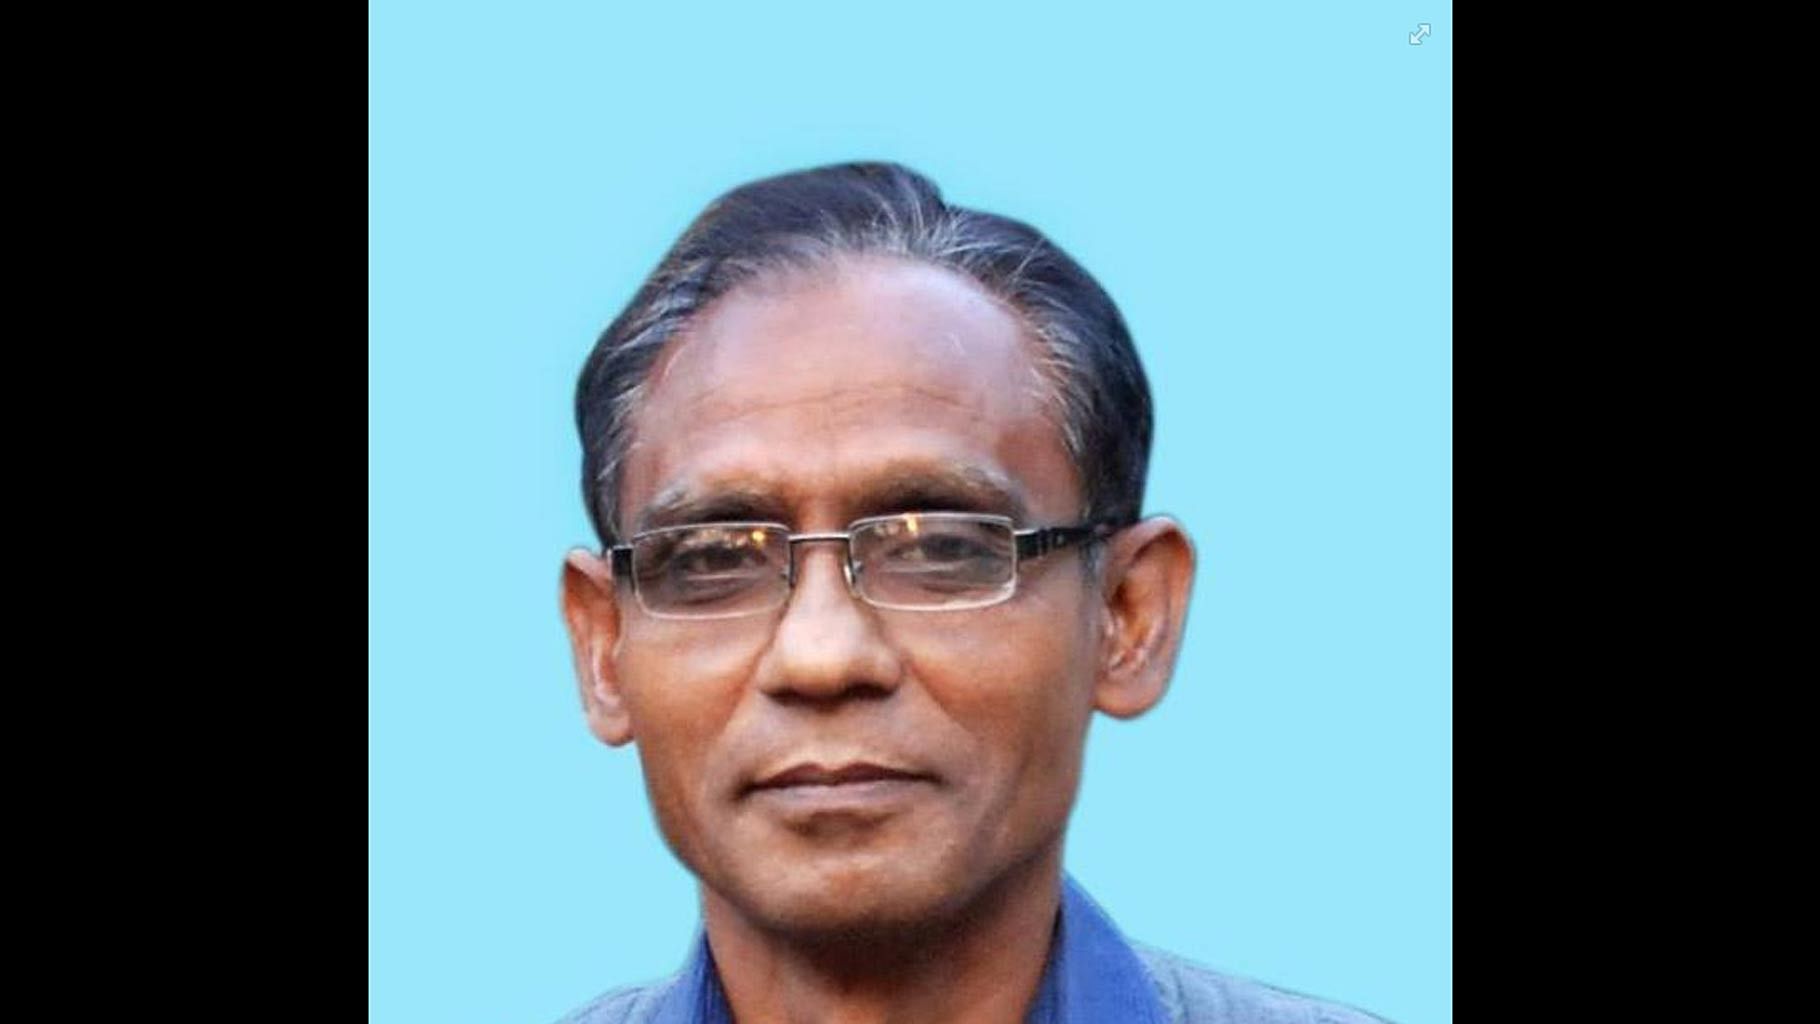 

Rezaul Karim Siddiquee. (Photo Courtesy: Facebook page of <a href="https://www.facebook.com/rezaulkarim.siddiquee.3">Rezaul Karim Siddiquee</a>)